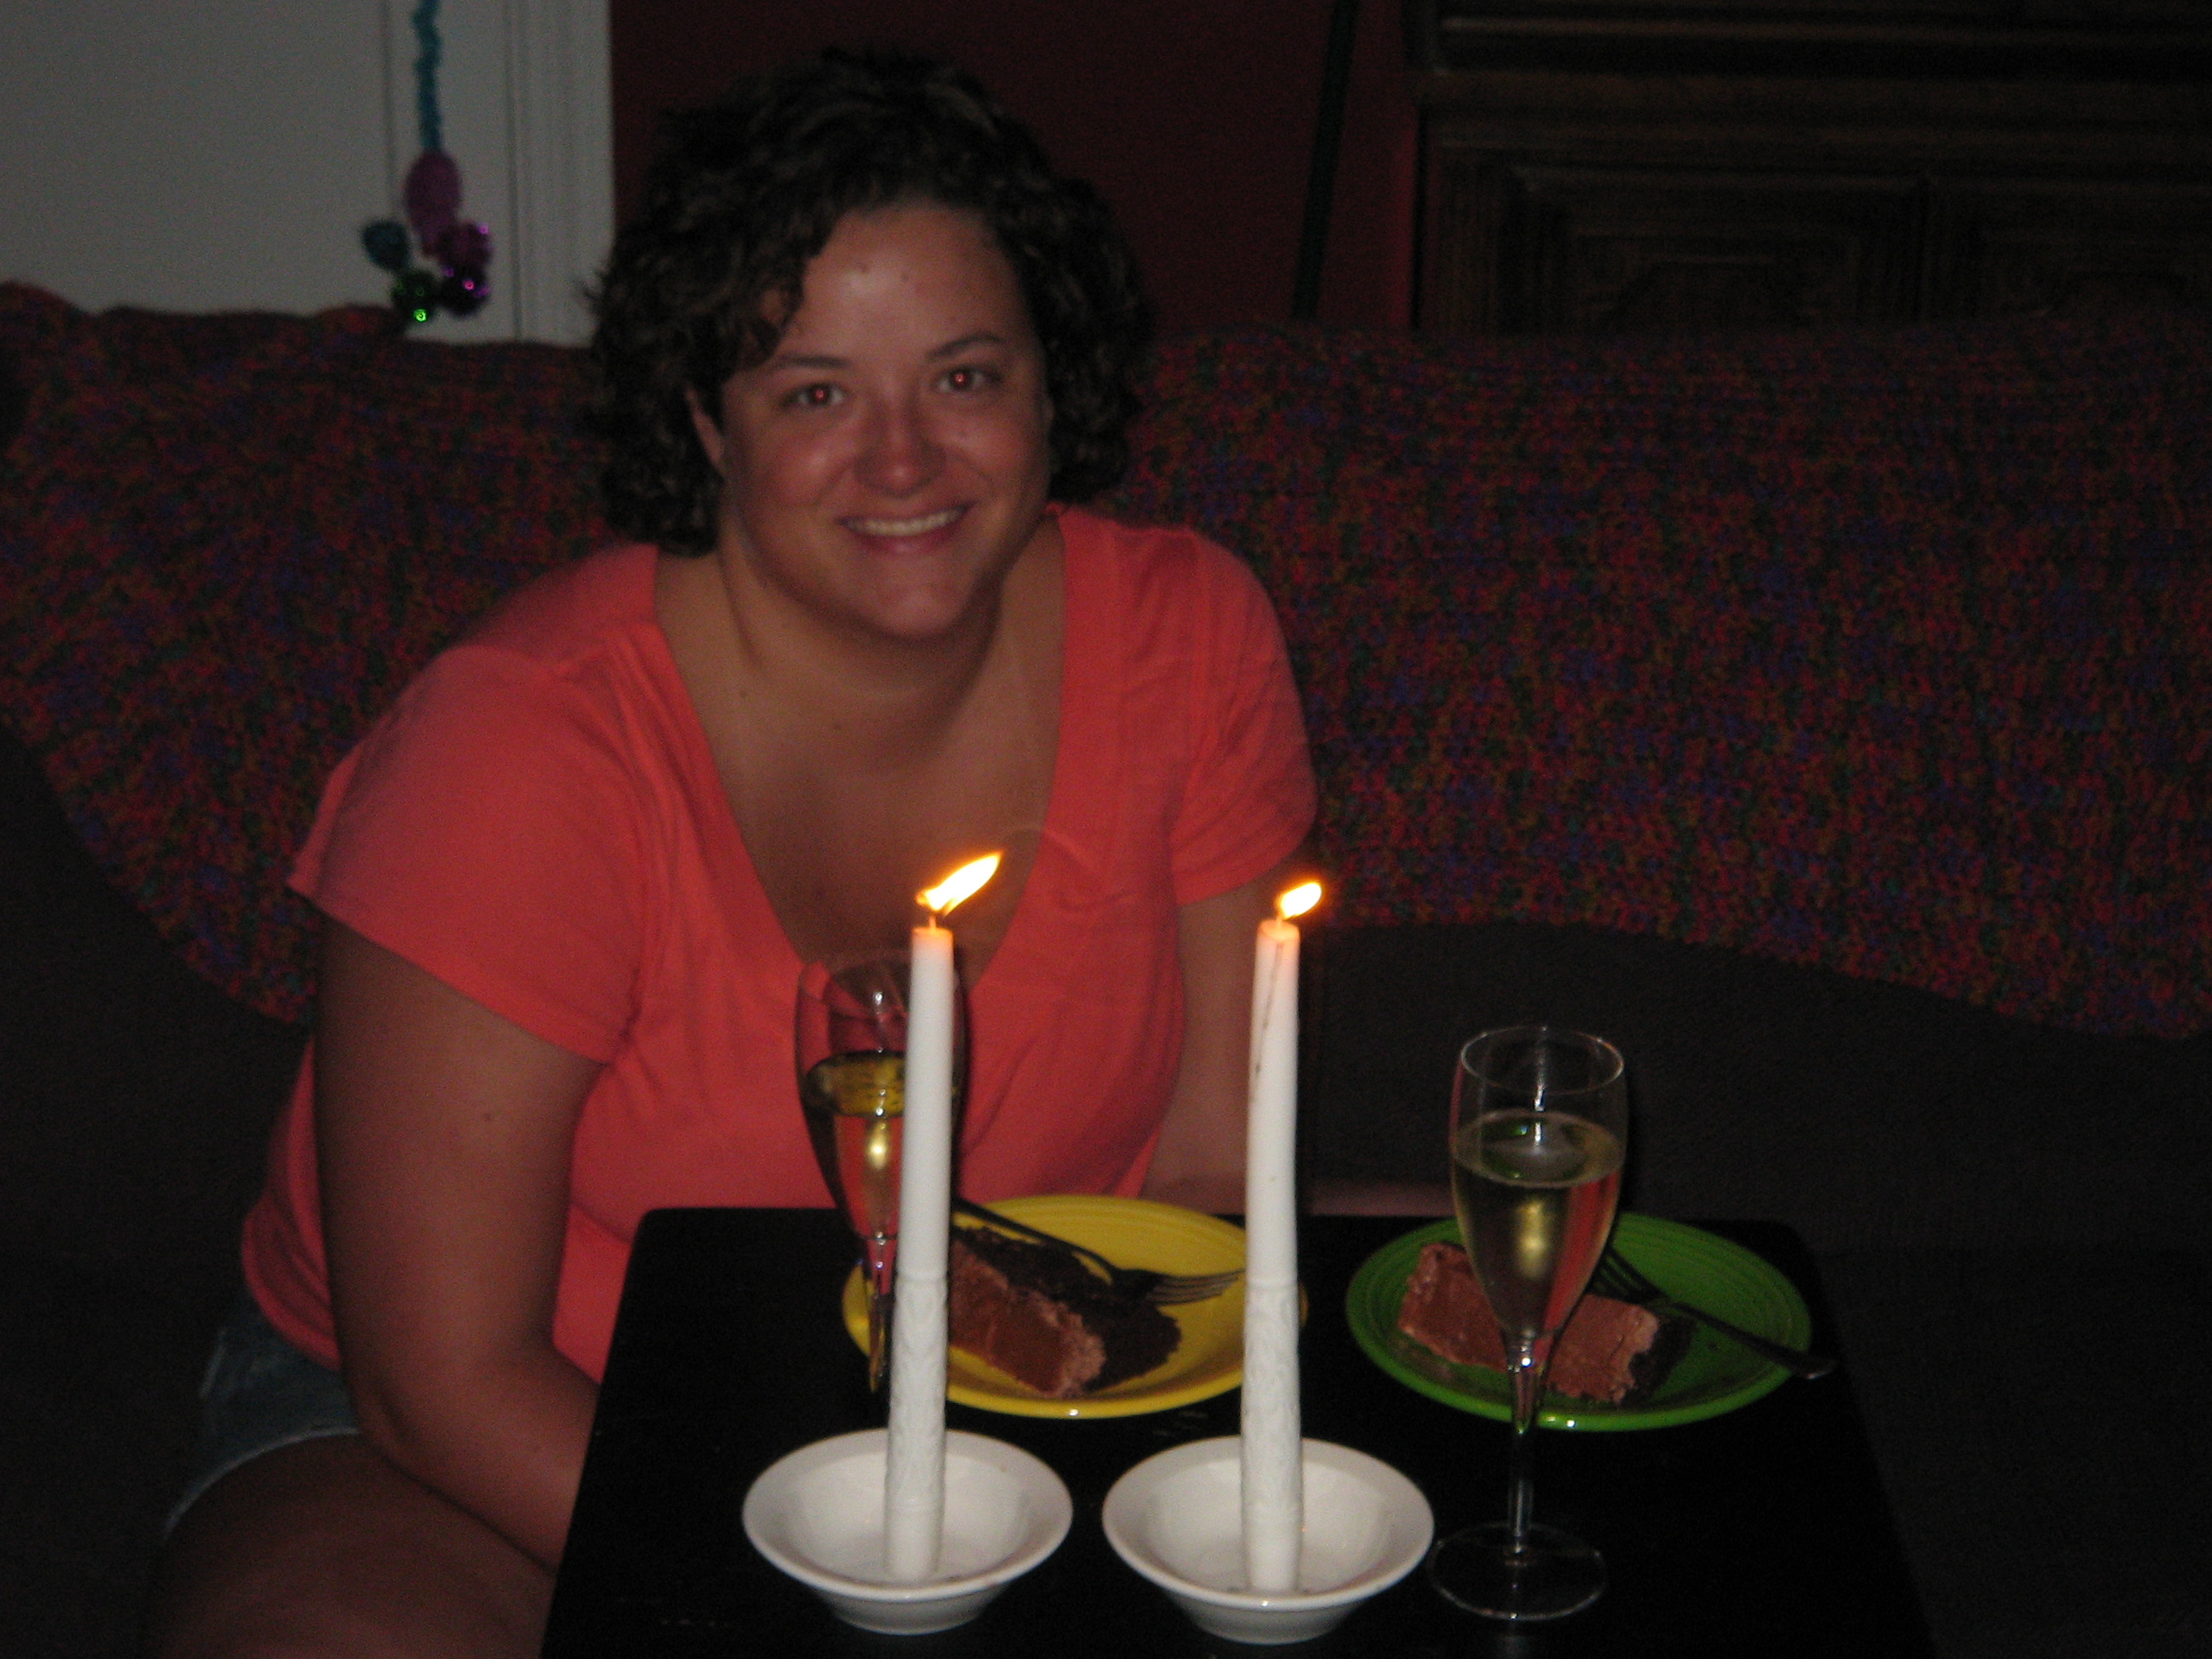 katie with candles